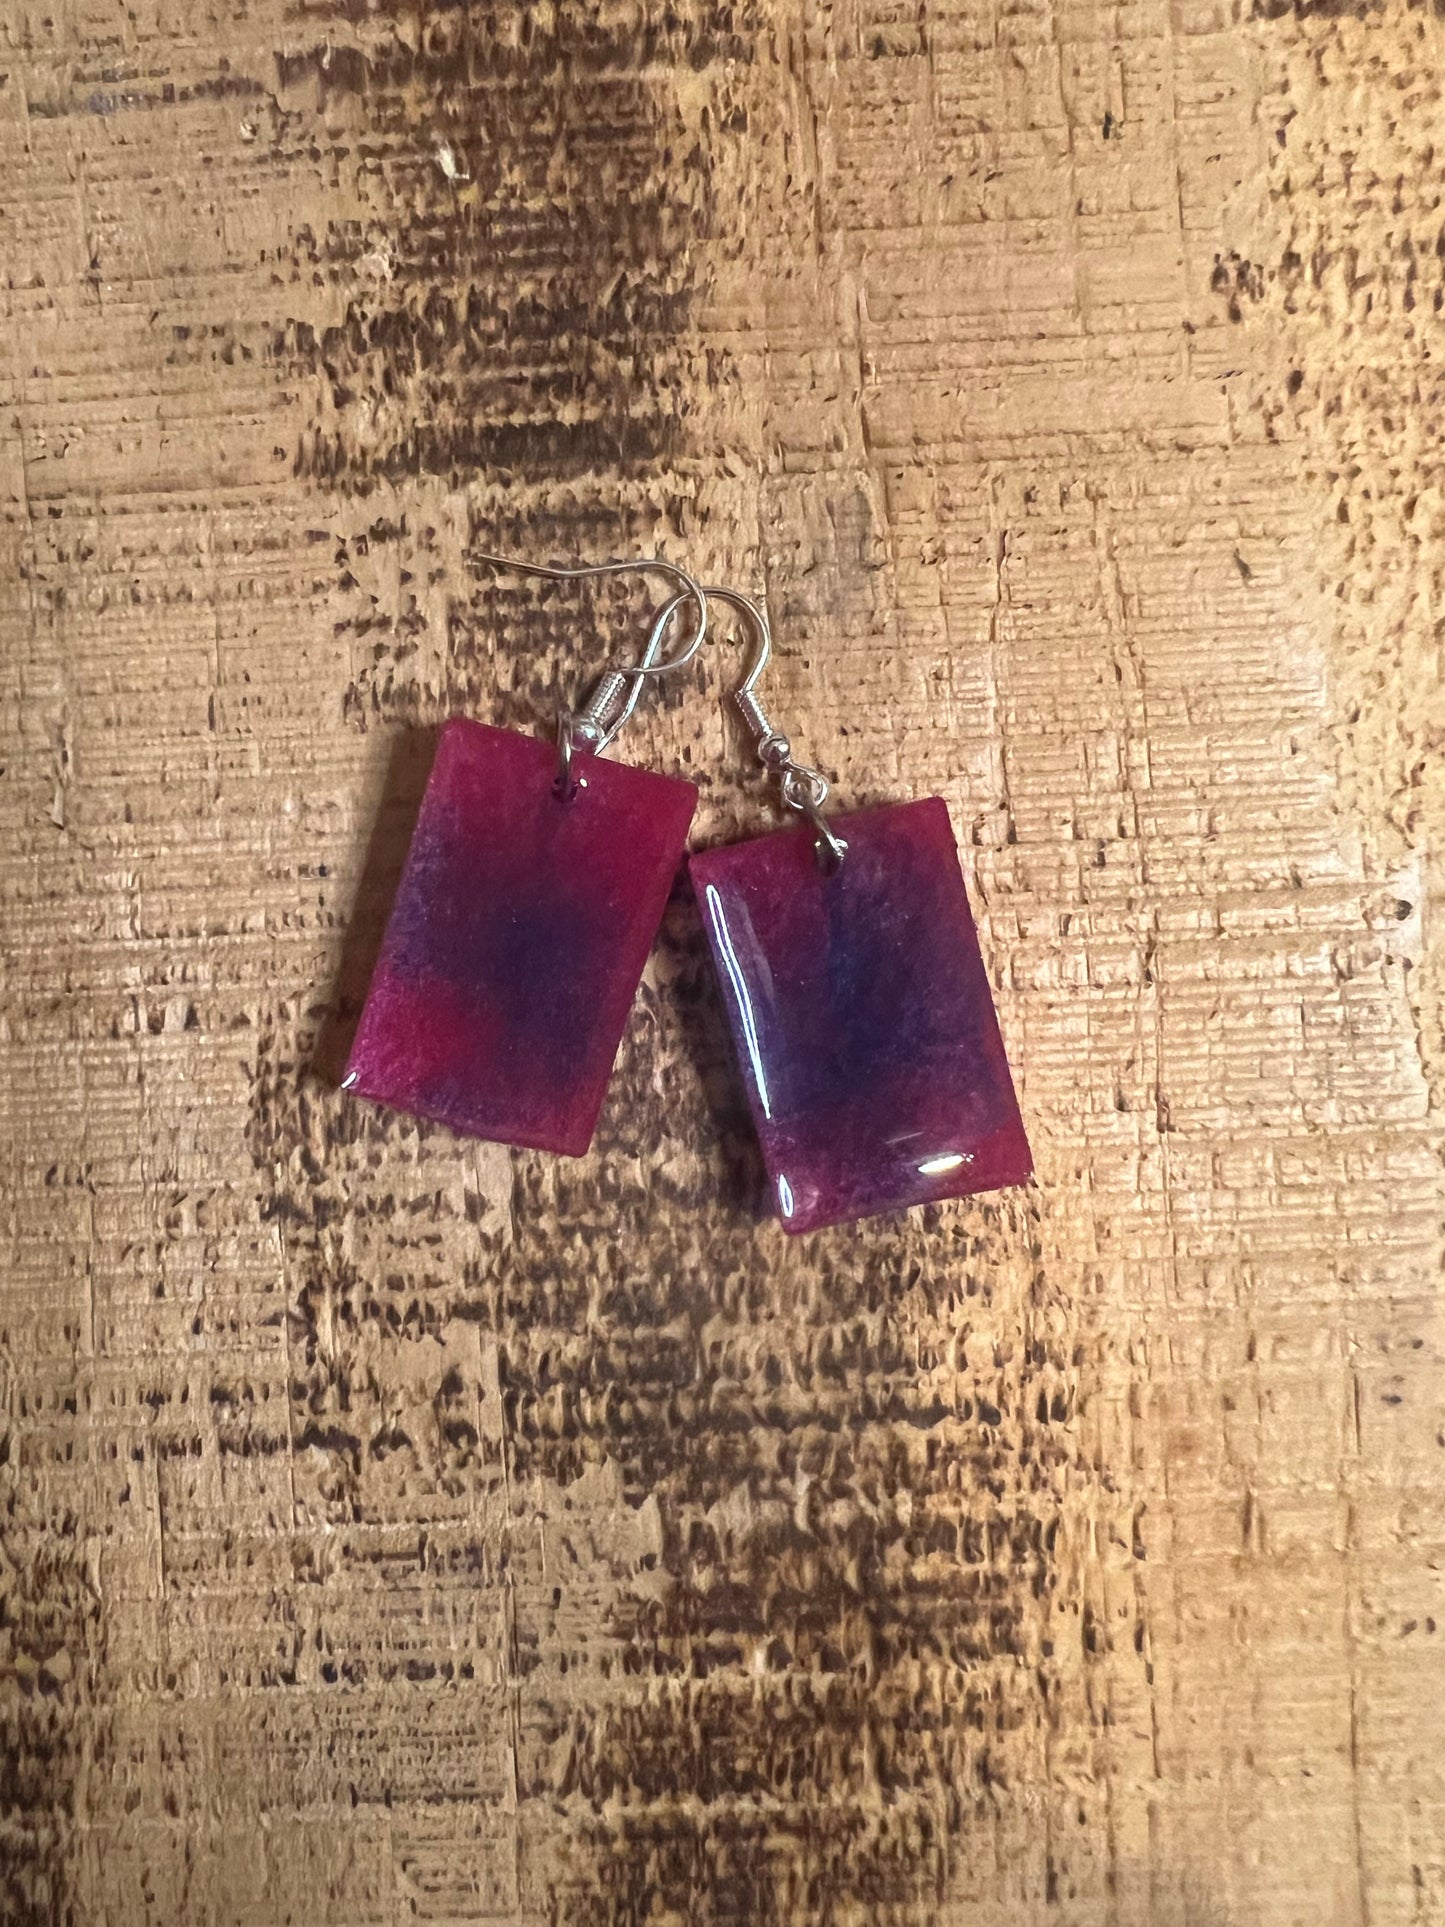 Hand Crafted Epoxy Resin Earrings